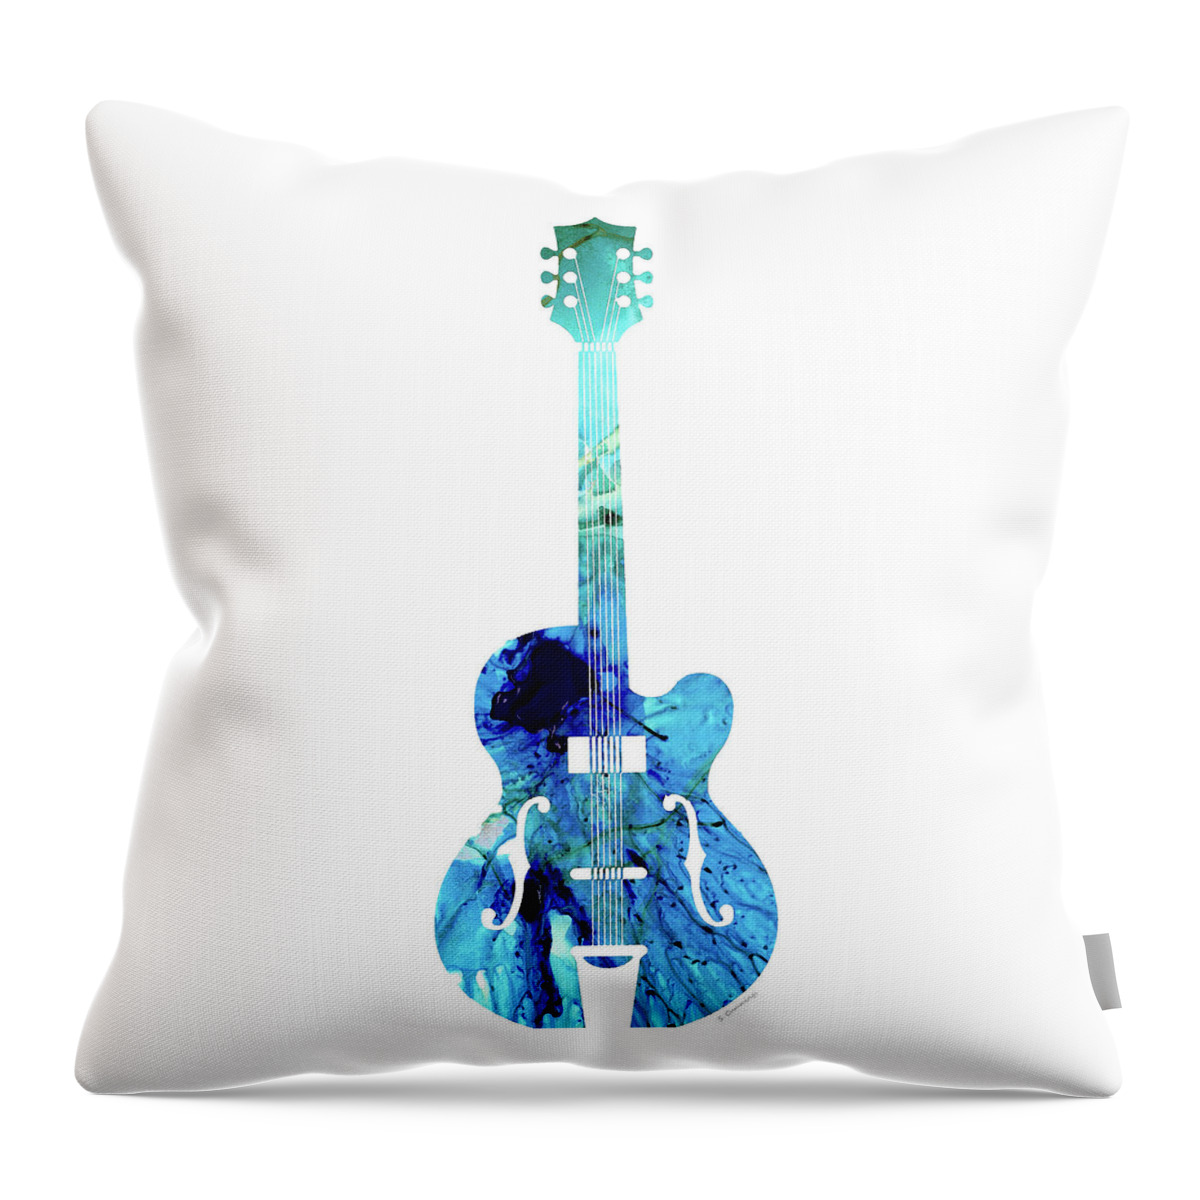 Guitar Throw Pillow featuring the painting Vintage Guitar 2 - Colorful Abstract Musical Instrument by Sharon Cummings